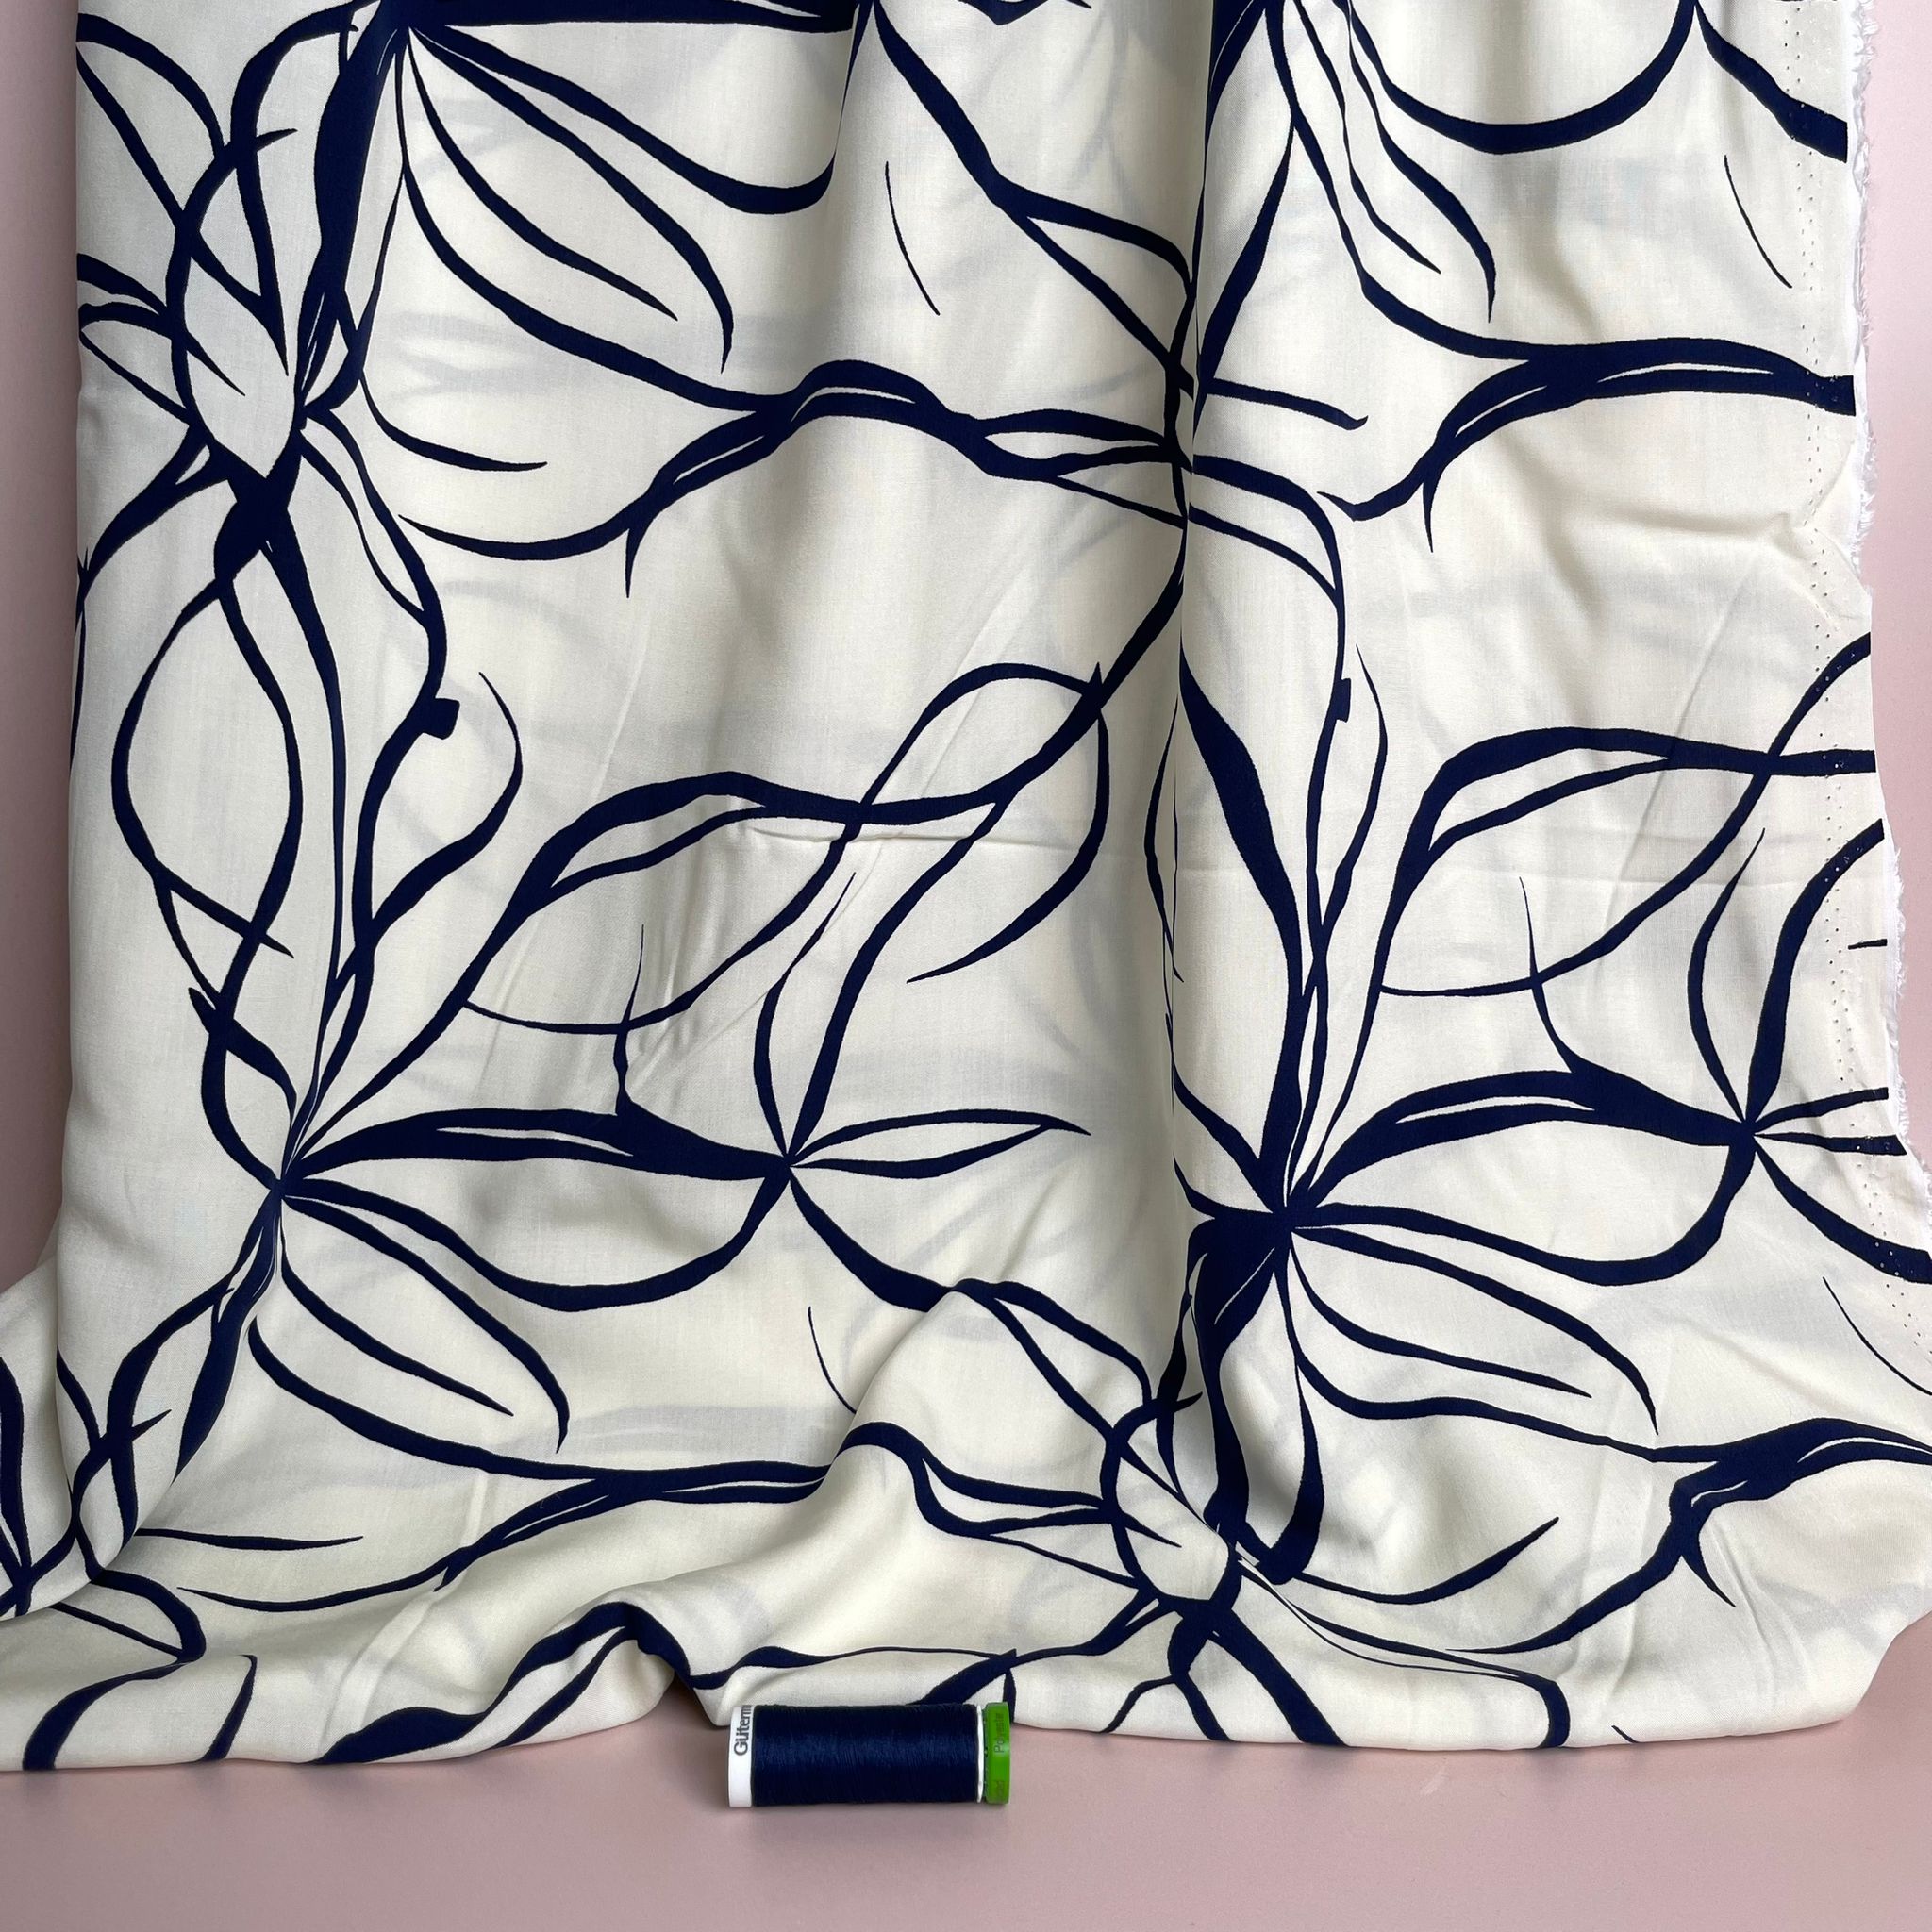 Natural Lines on Off-White Viscose Fabric